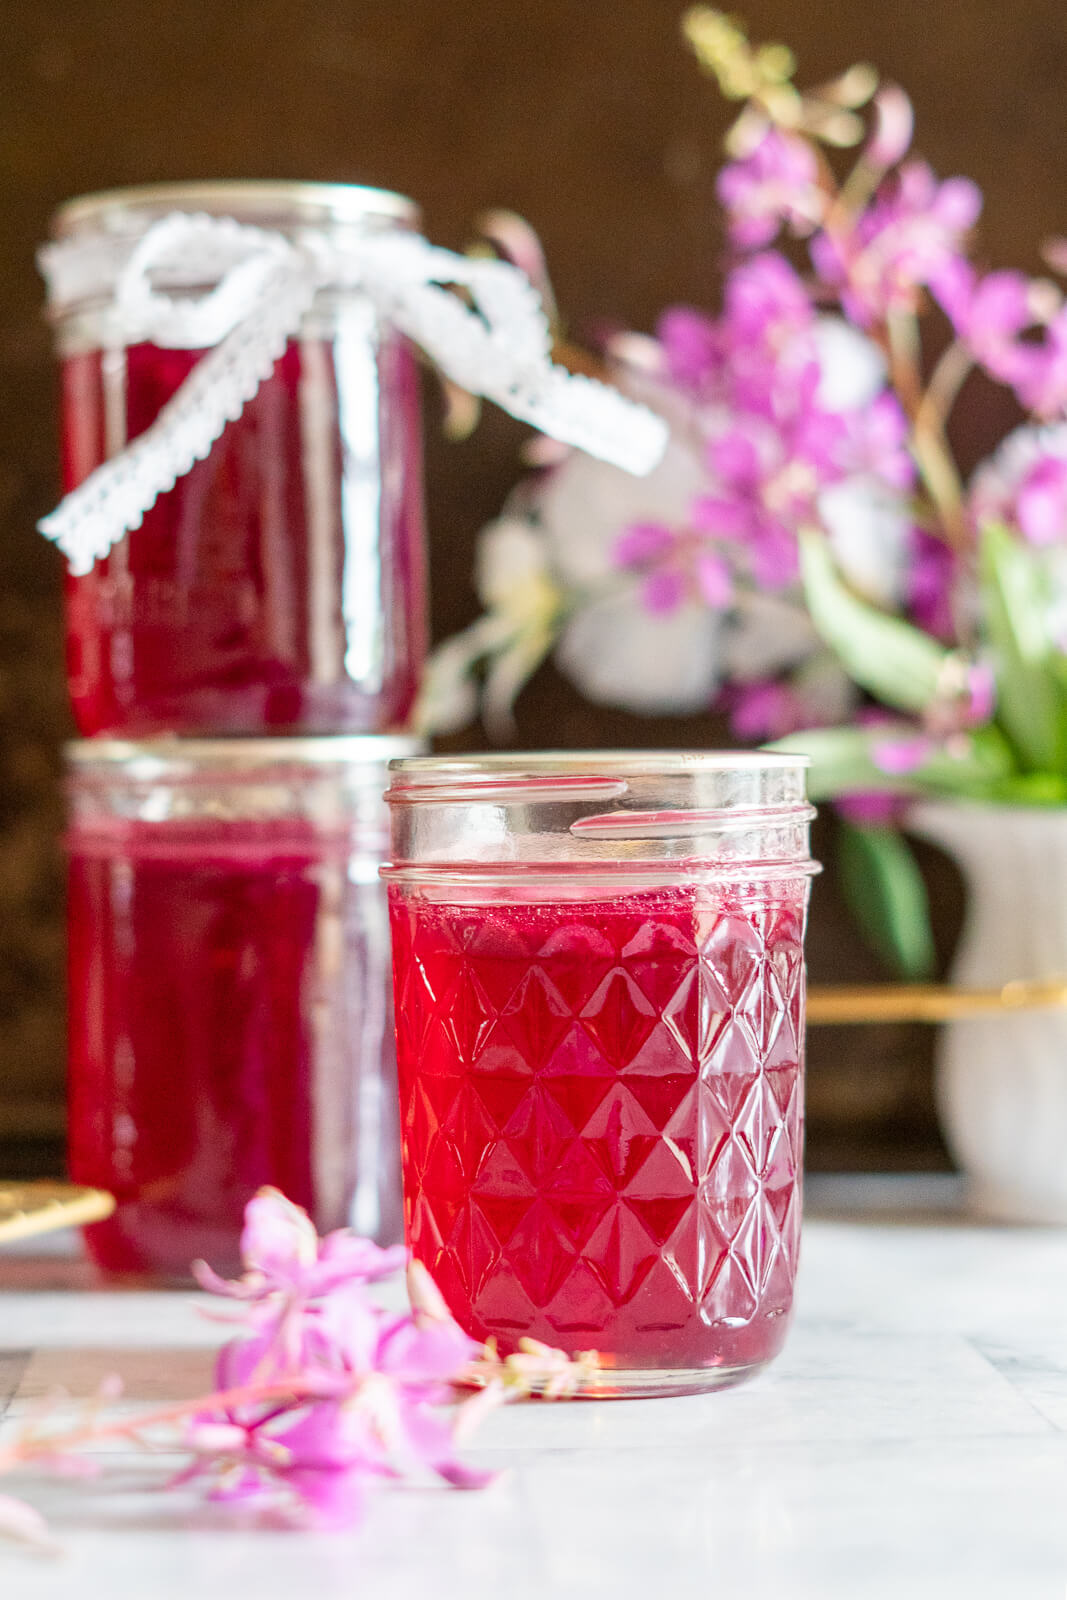 3 bright pink jars of fireweed jelly. 